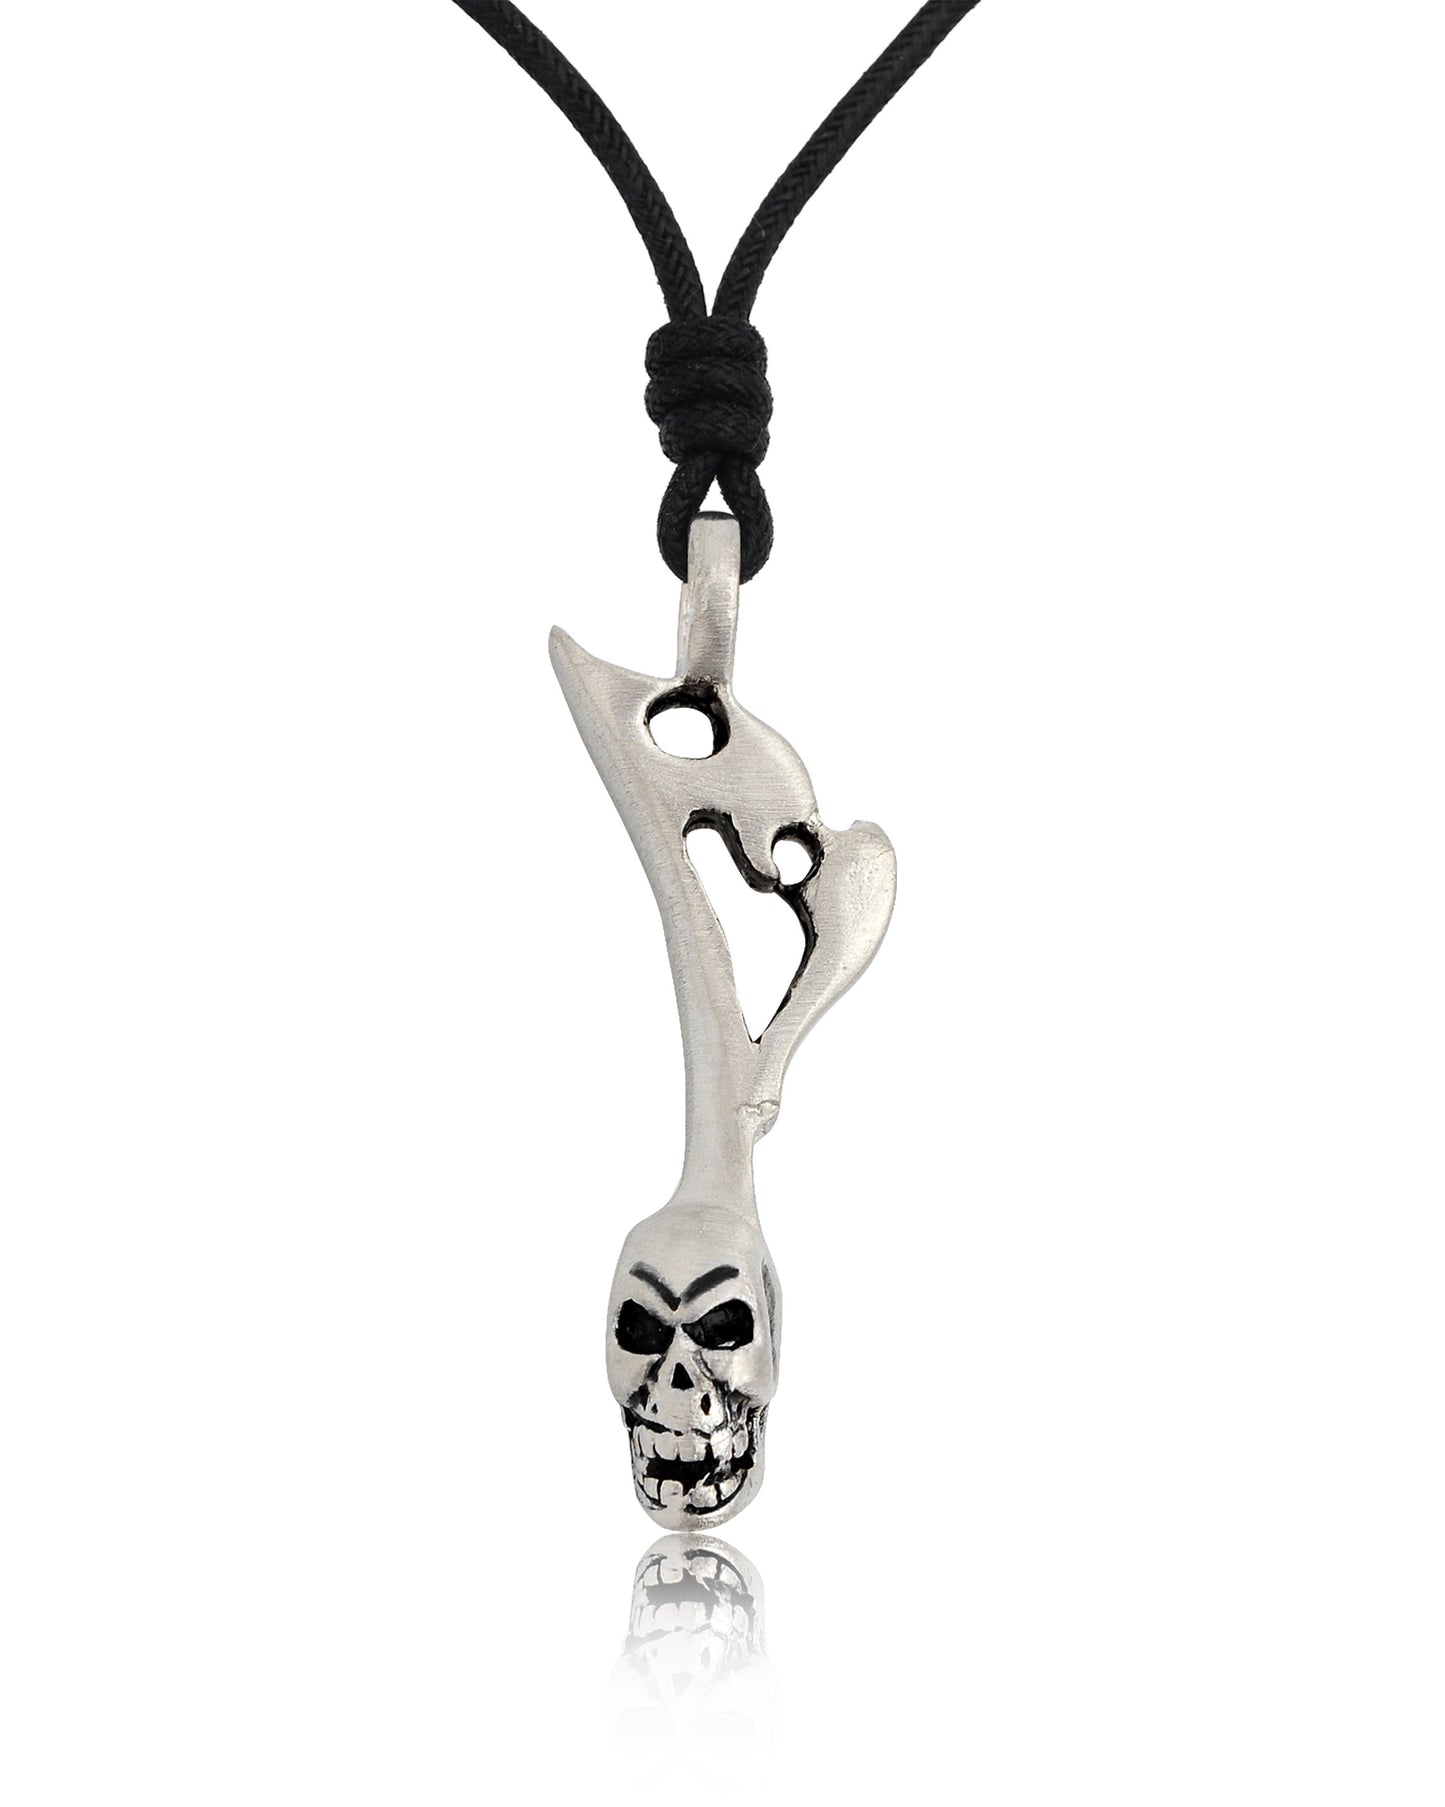 Skull Musical Silver Pewter Charm Necklace Pendant Jewelry